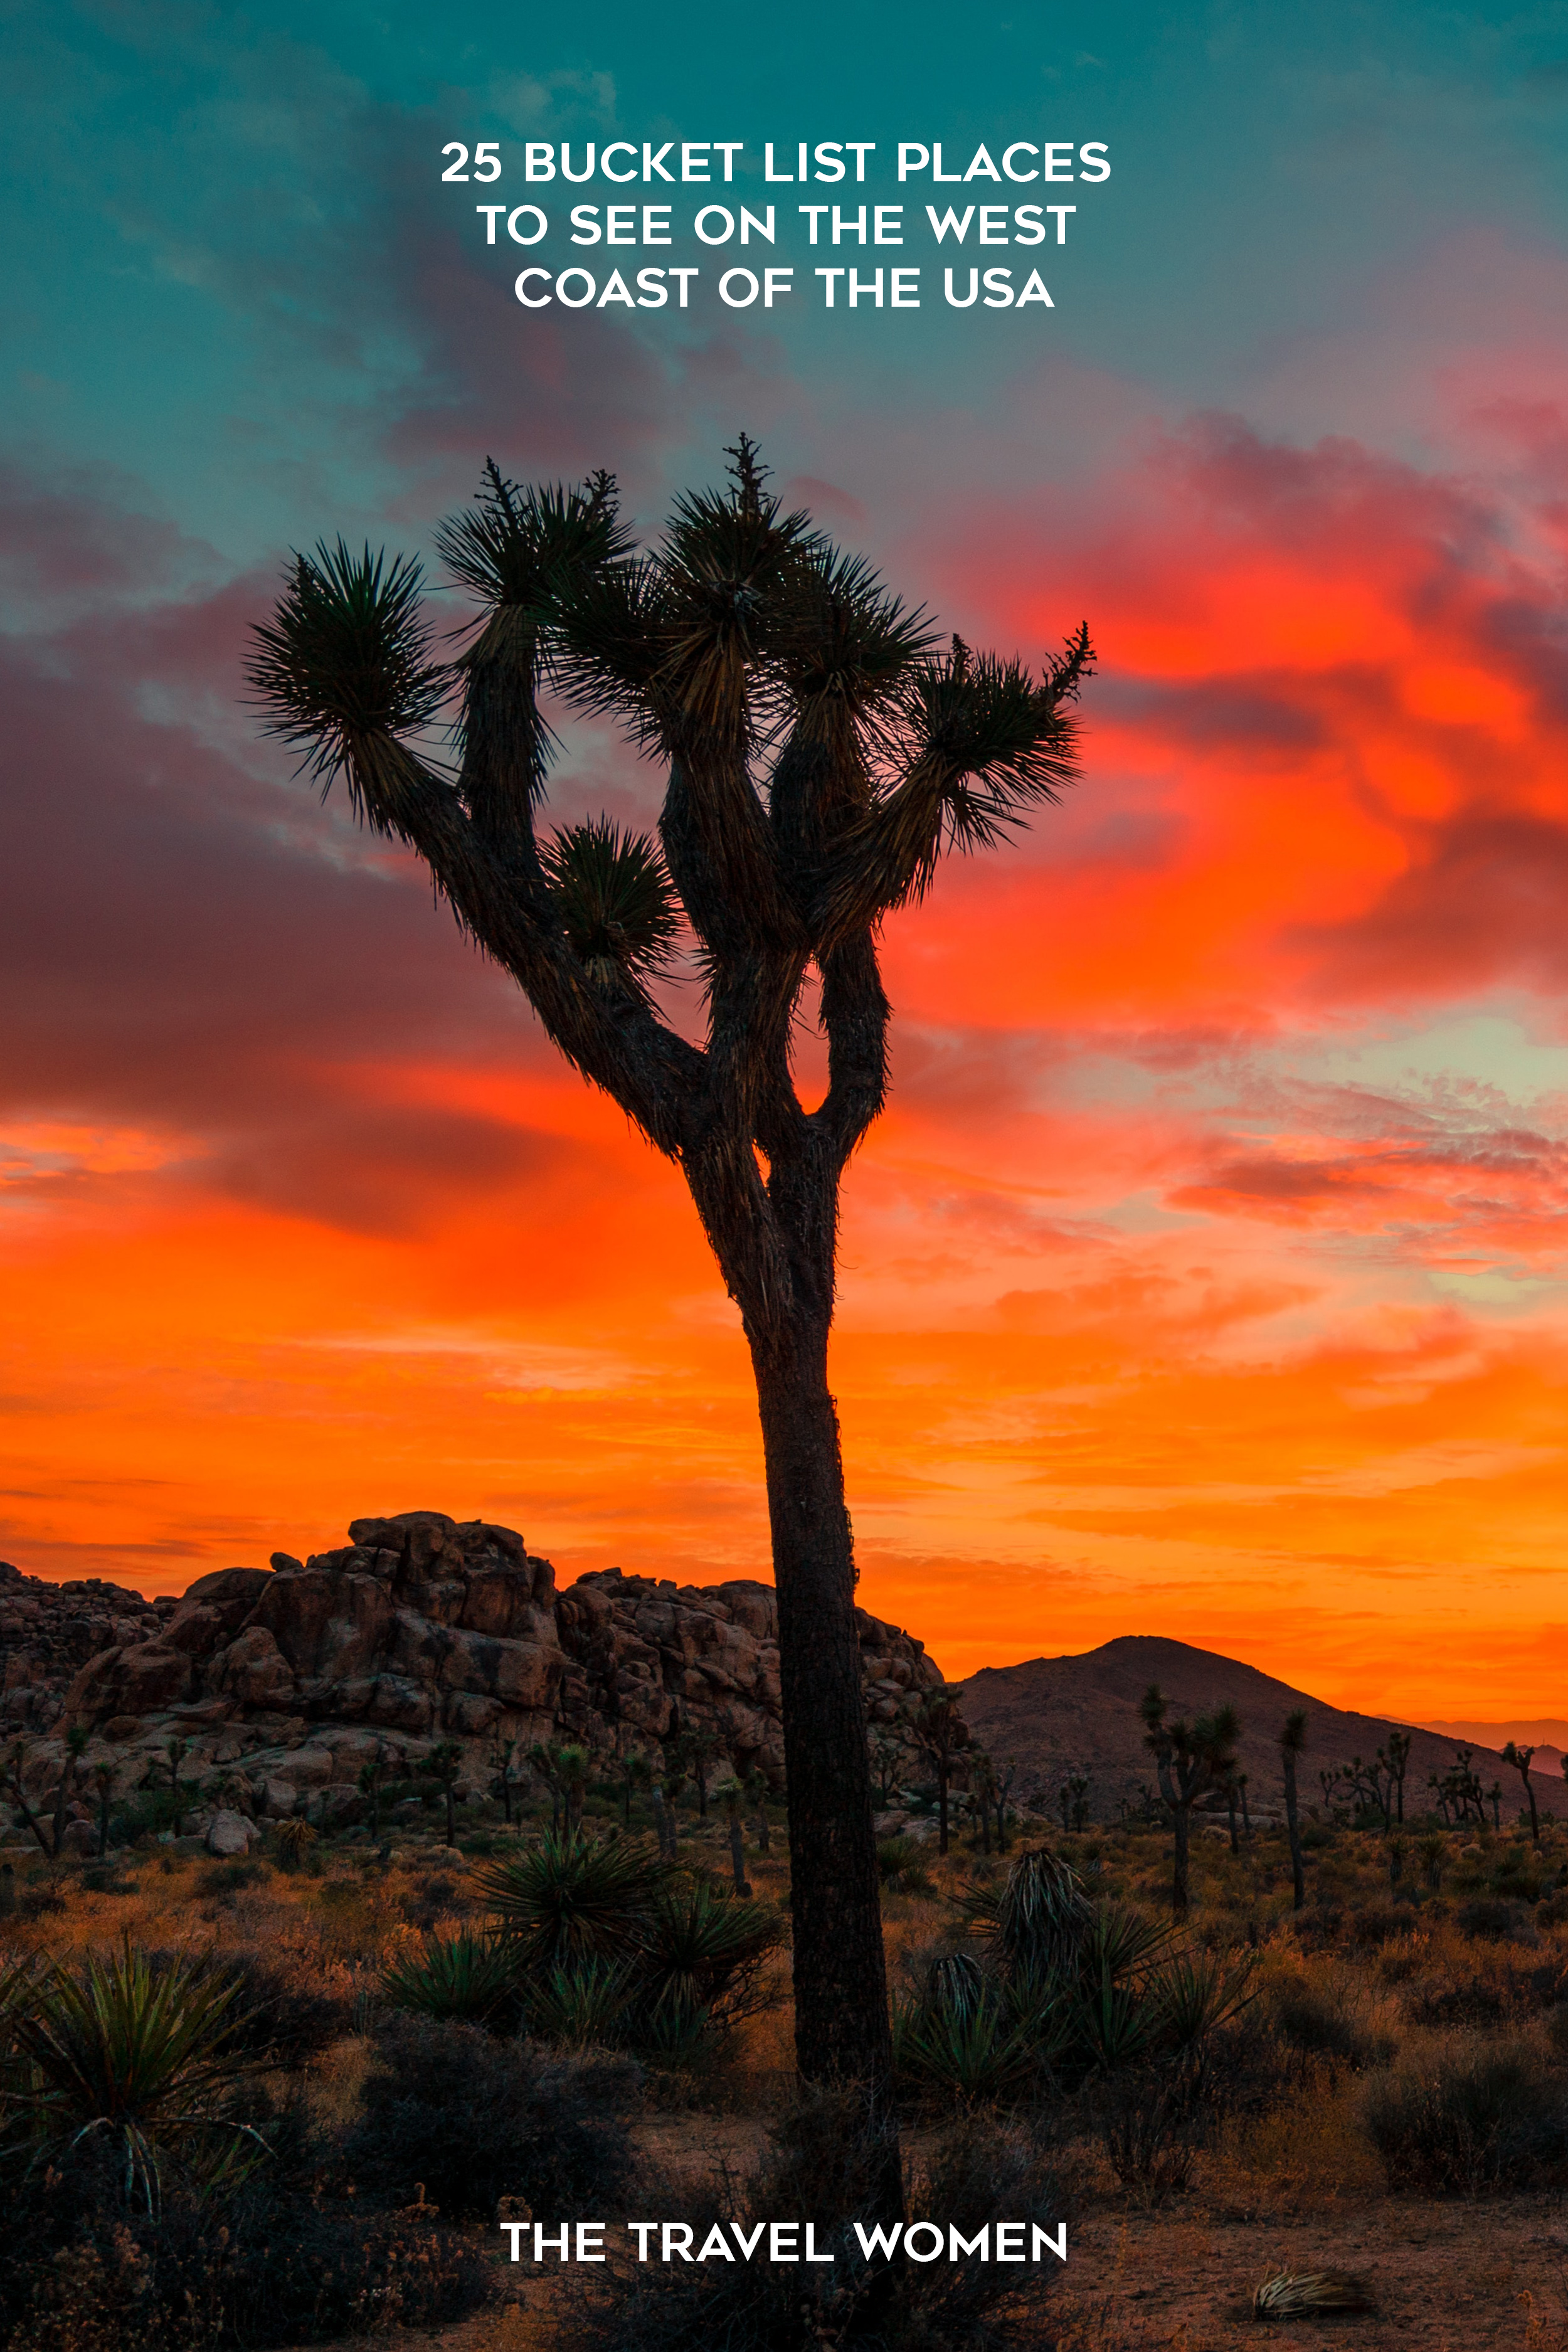 25 Bucket List Places to See on the West Coast of the USA Joshua Tree sunset